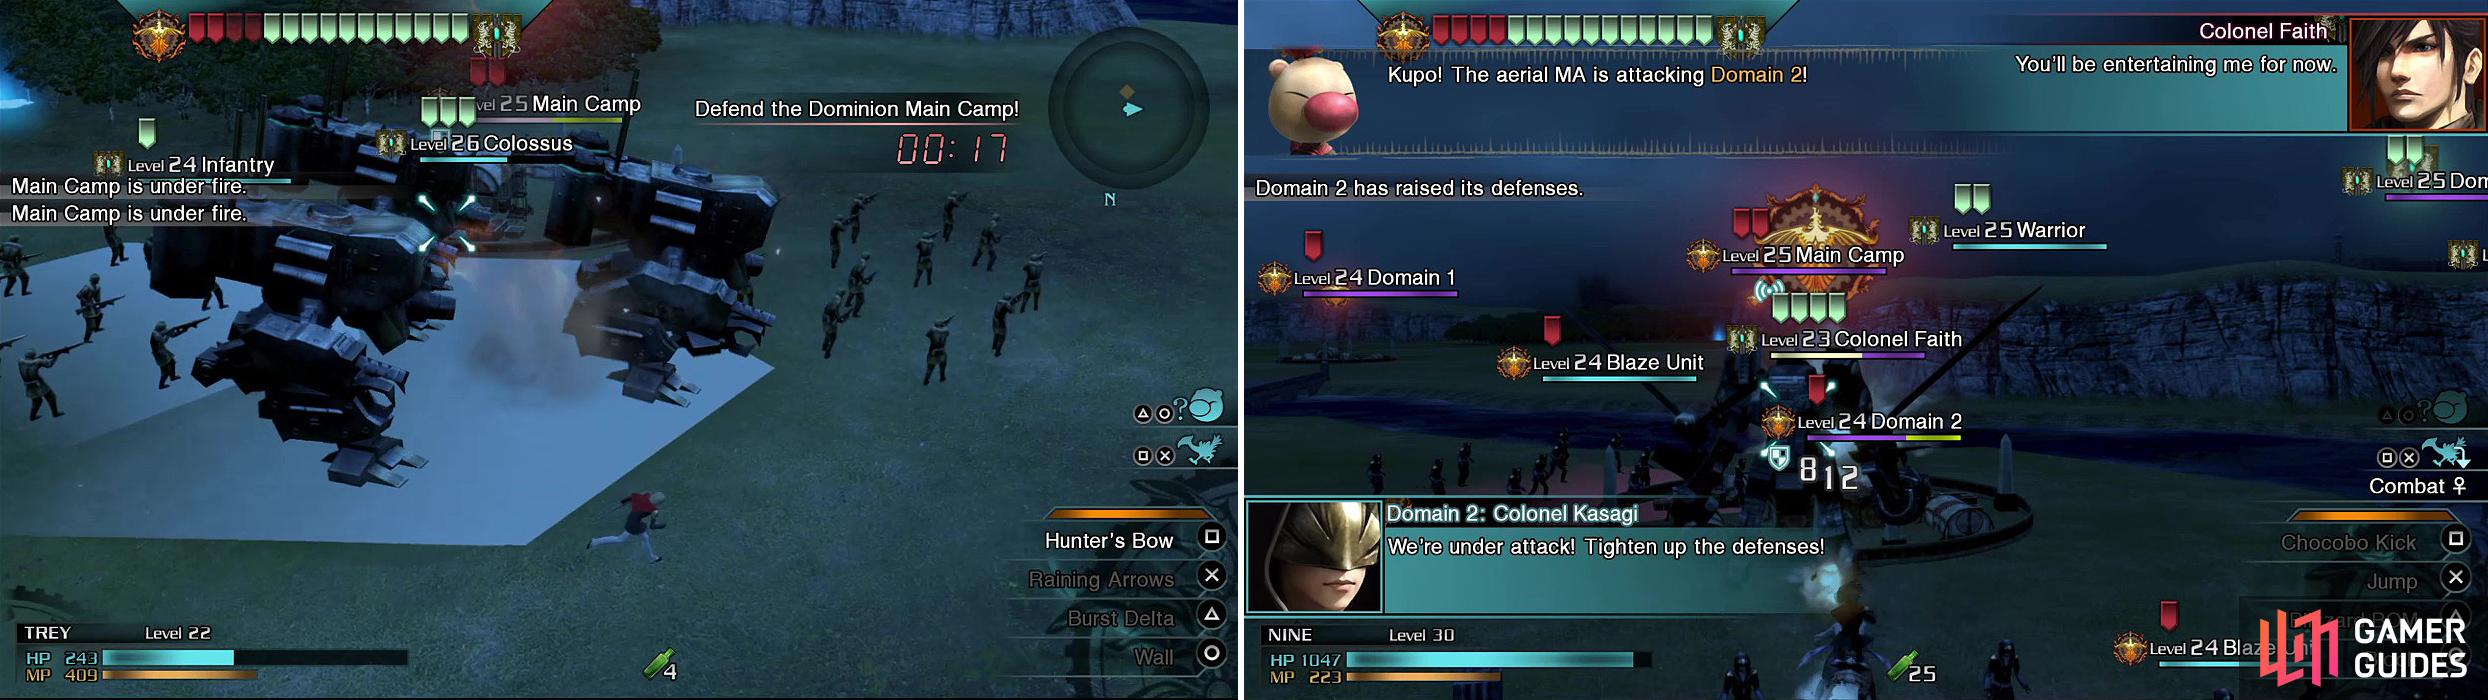 Rush back to the main camp when Moglin tells you (left). Colonel Faith doesn’t like a chocobo kicking his behind (right). He will set upon the domains you’ve captured.